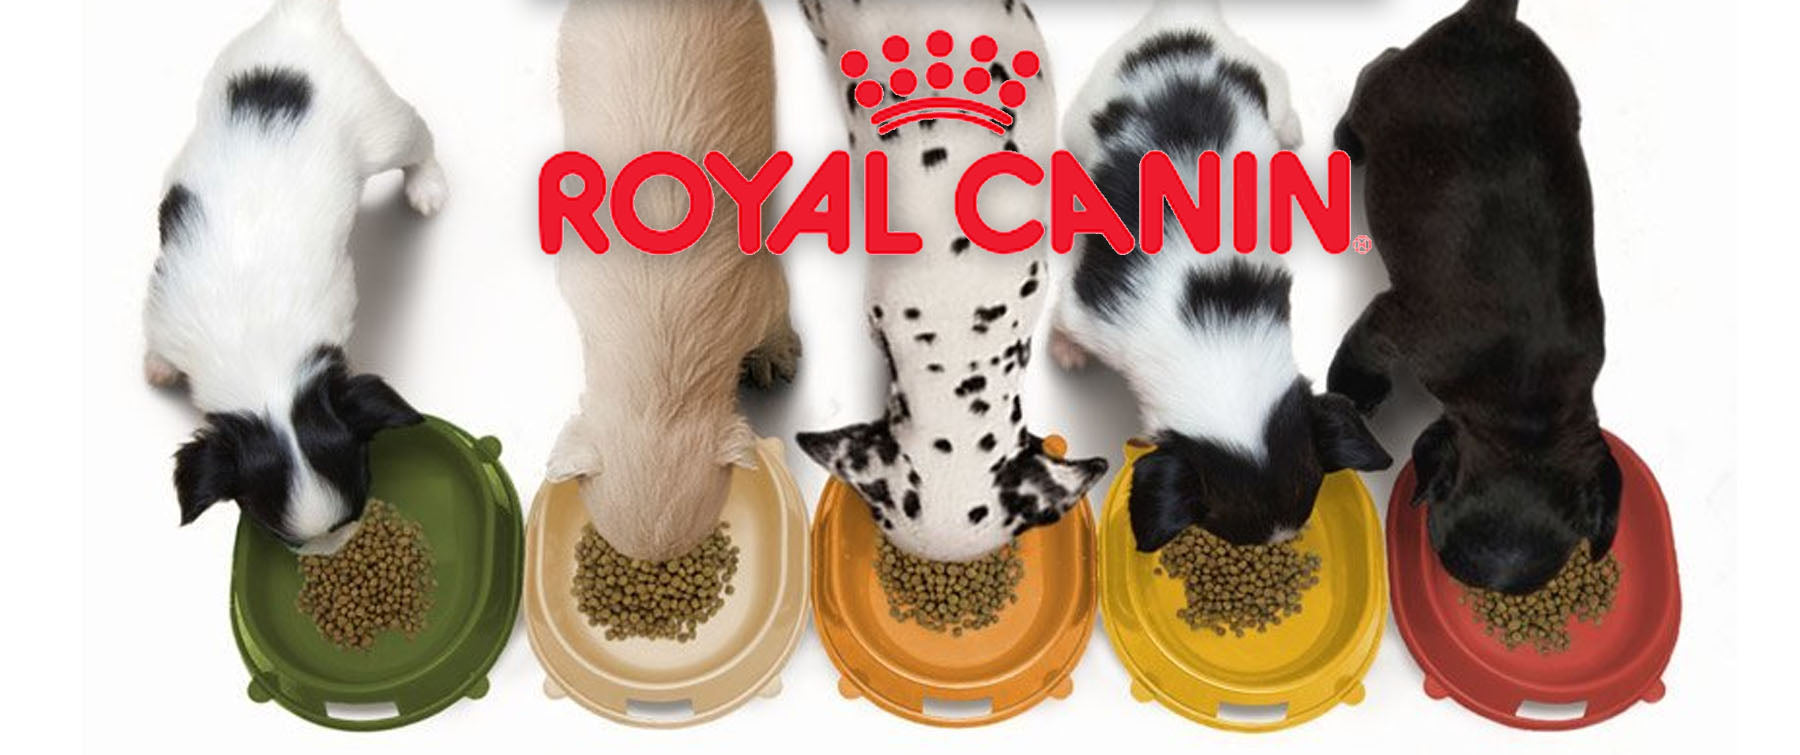 Royal Canin: How is it breed specific?